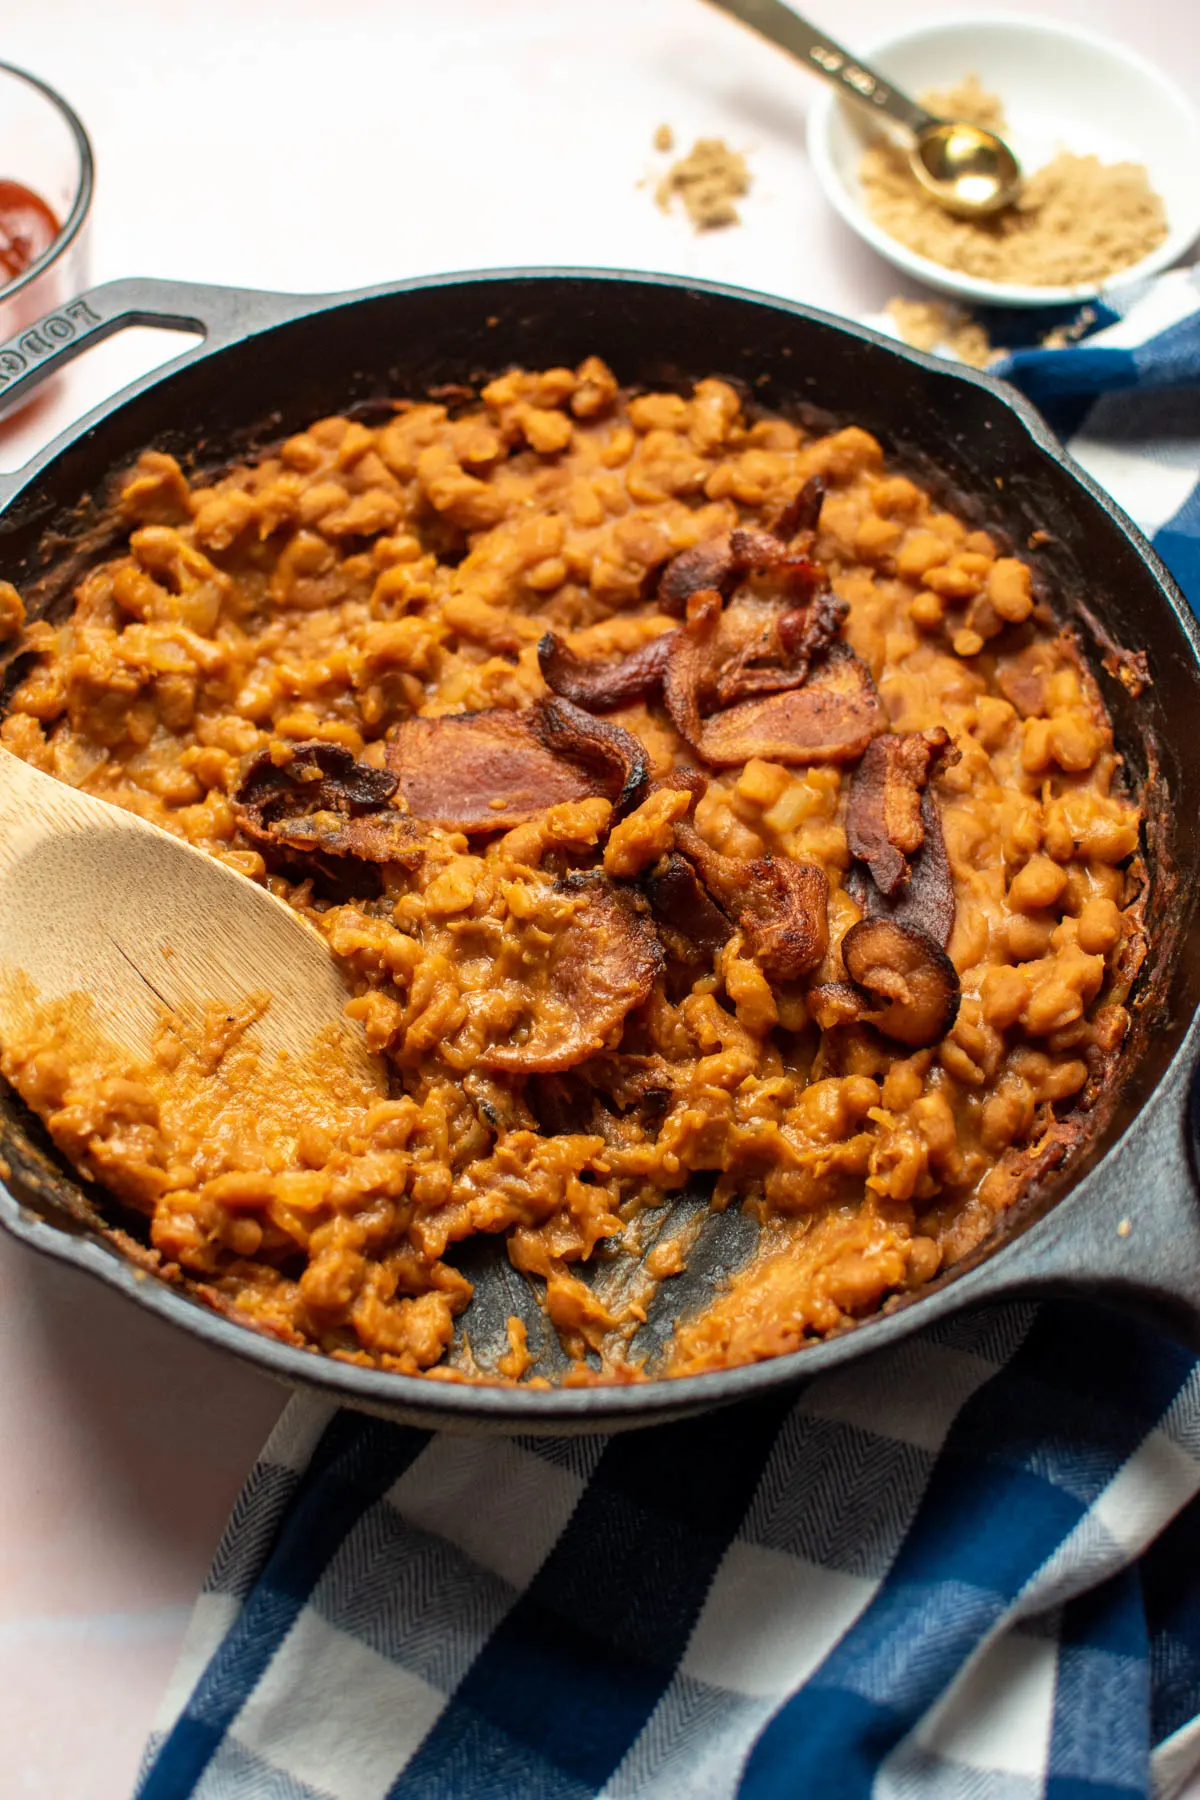 Wooden spoon resting in cast iron skillet of baked beans with mustard and brown sugar.